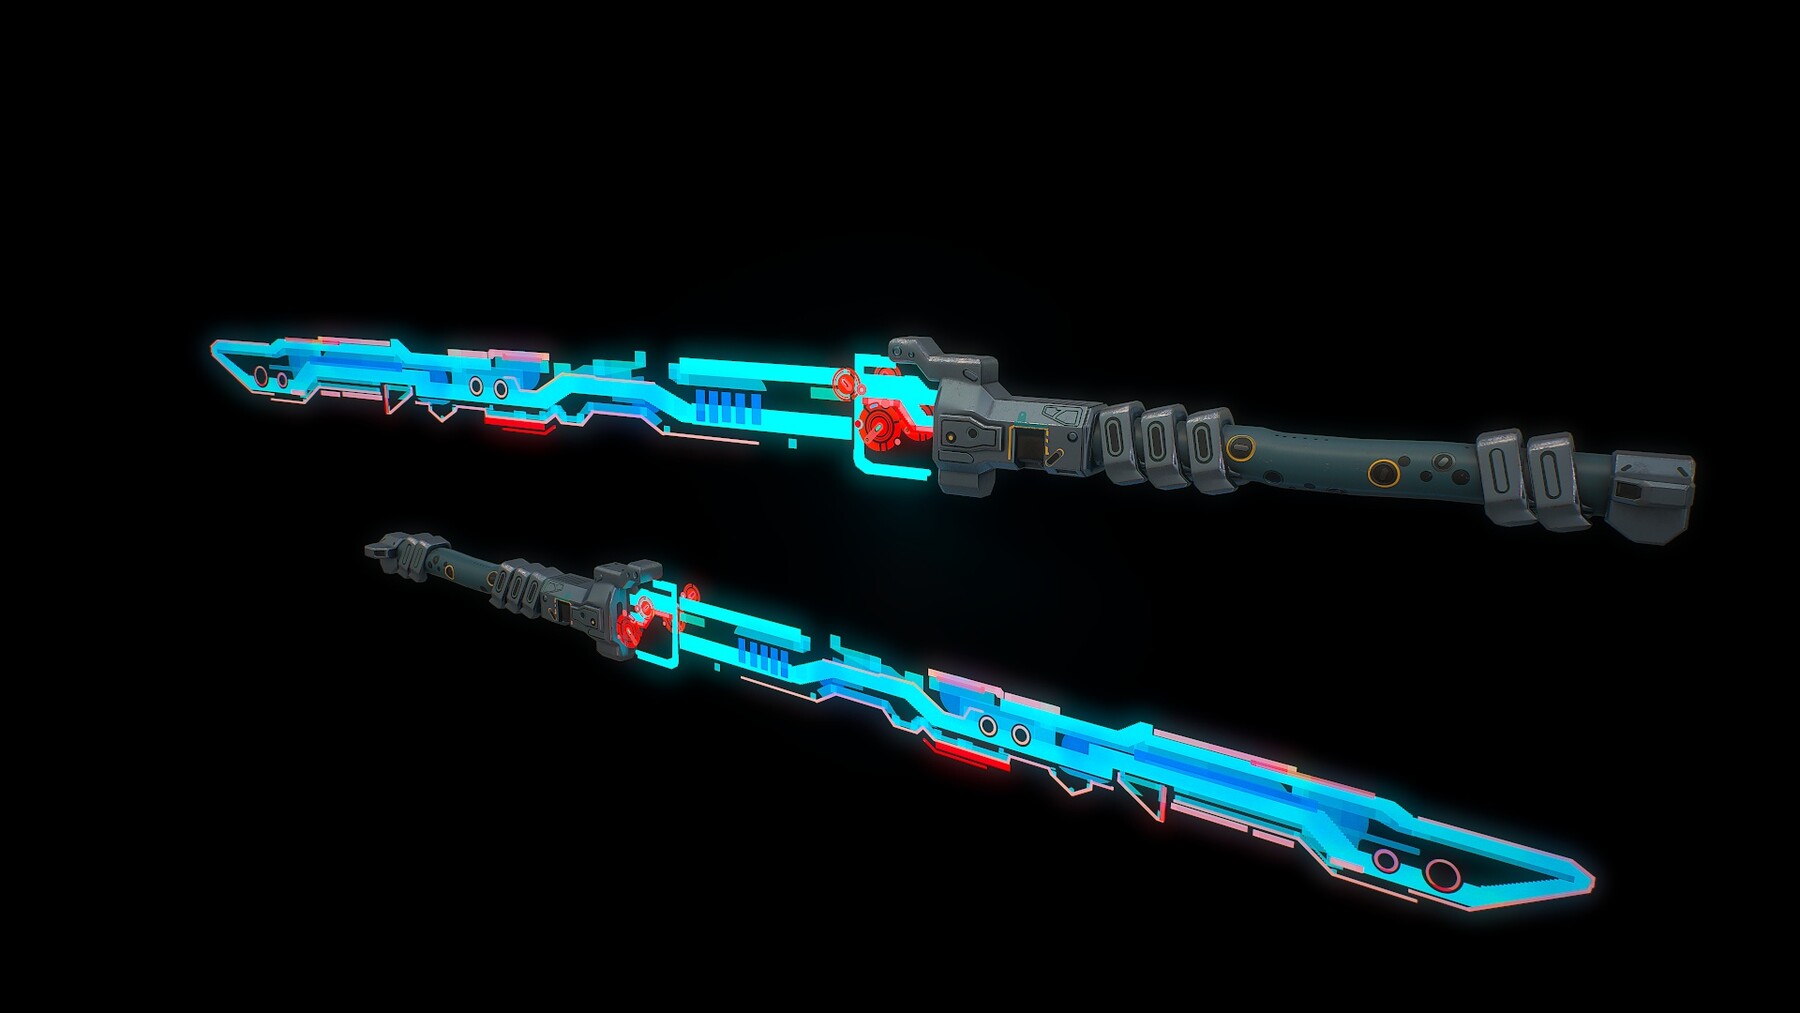 ArtStation - Low poly sci fi energy sword weapon | Game Assets